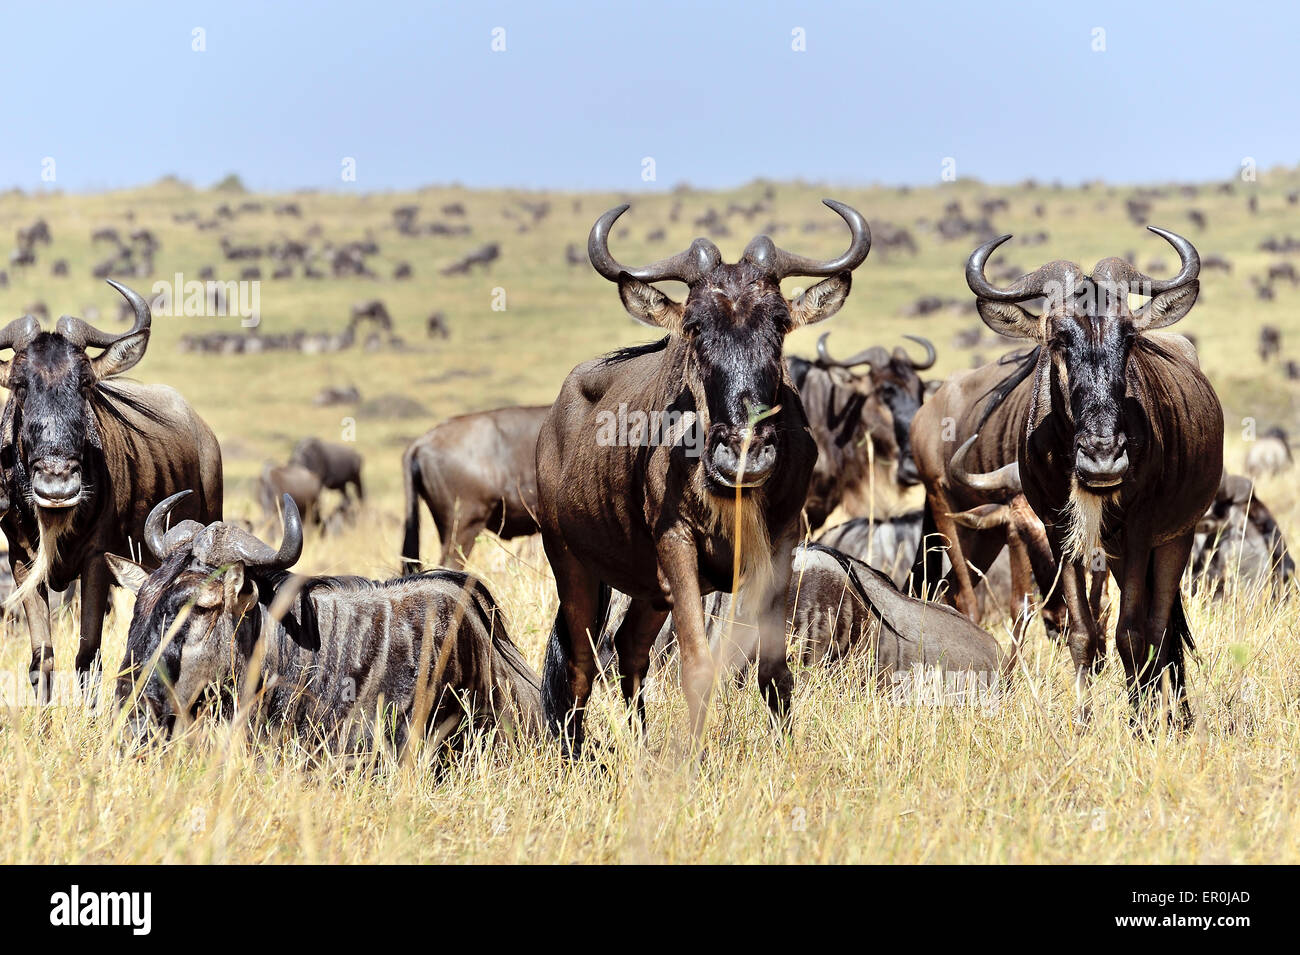 Wildebeests in the Masai Mara while migration Stock Photo